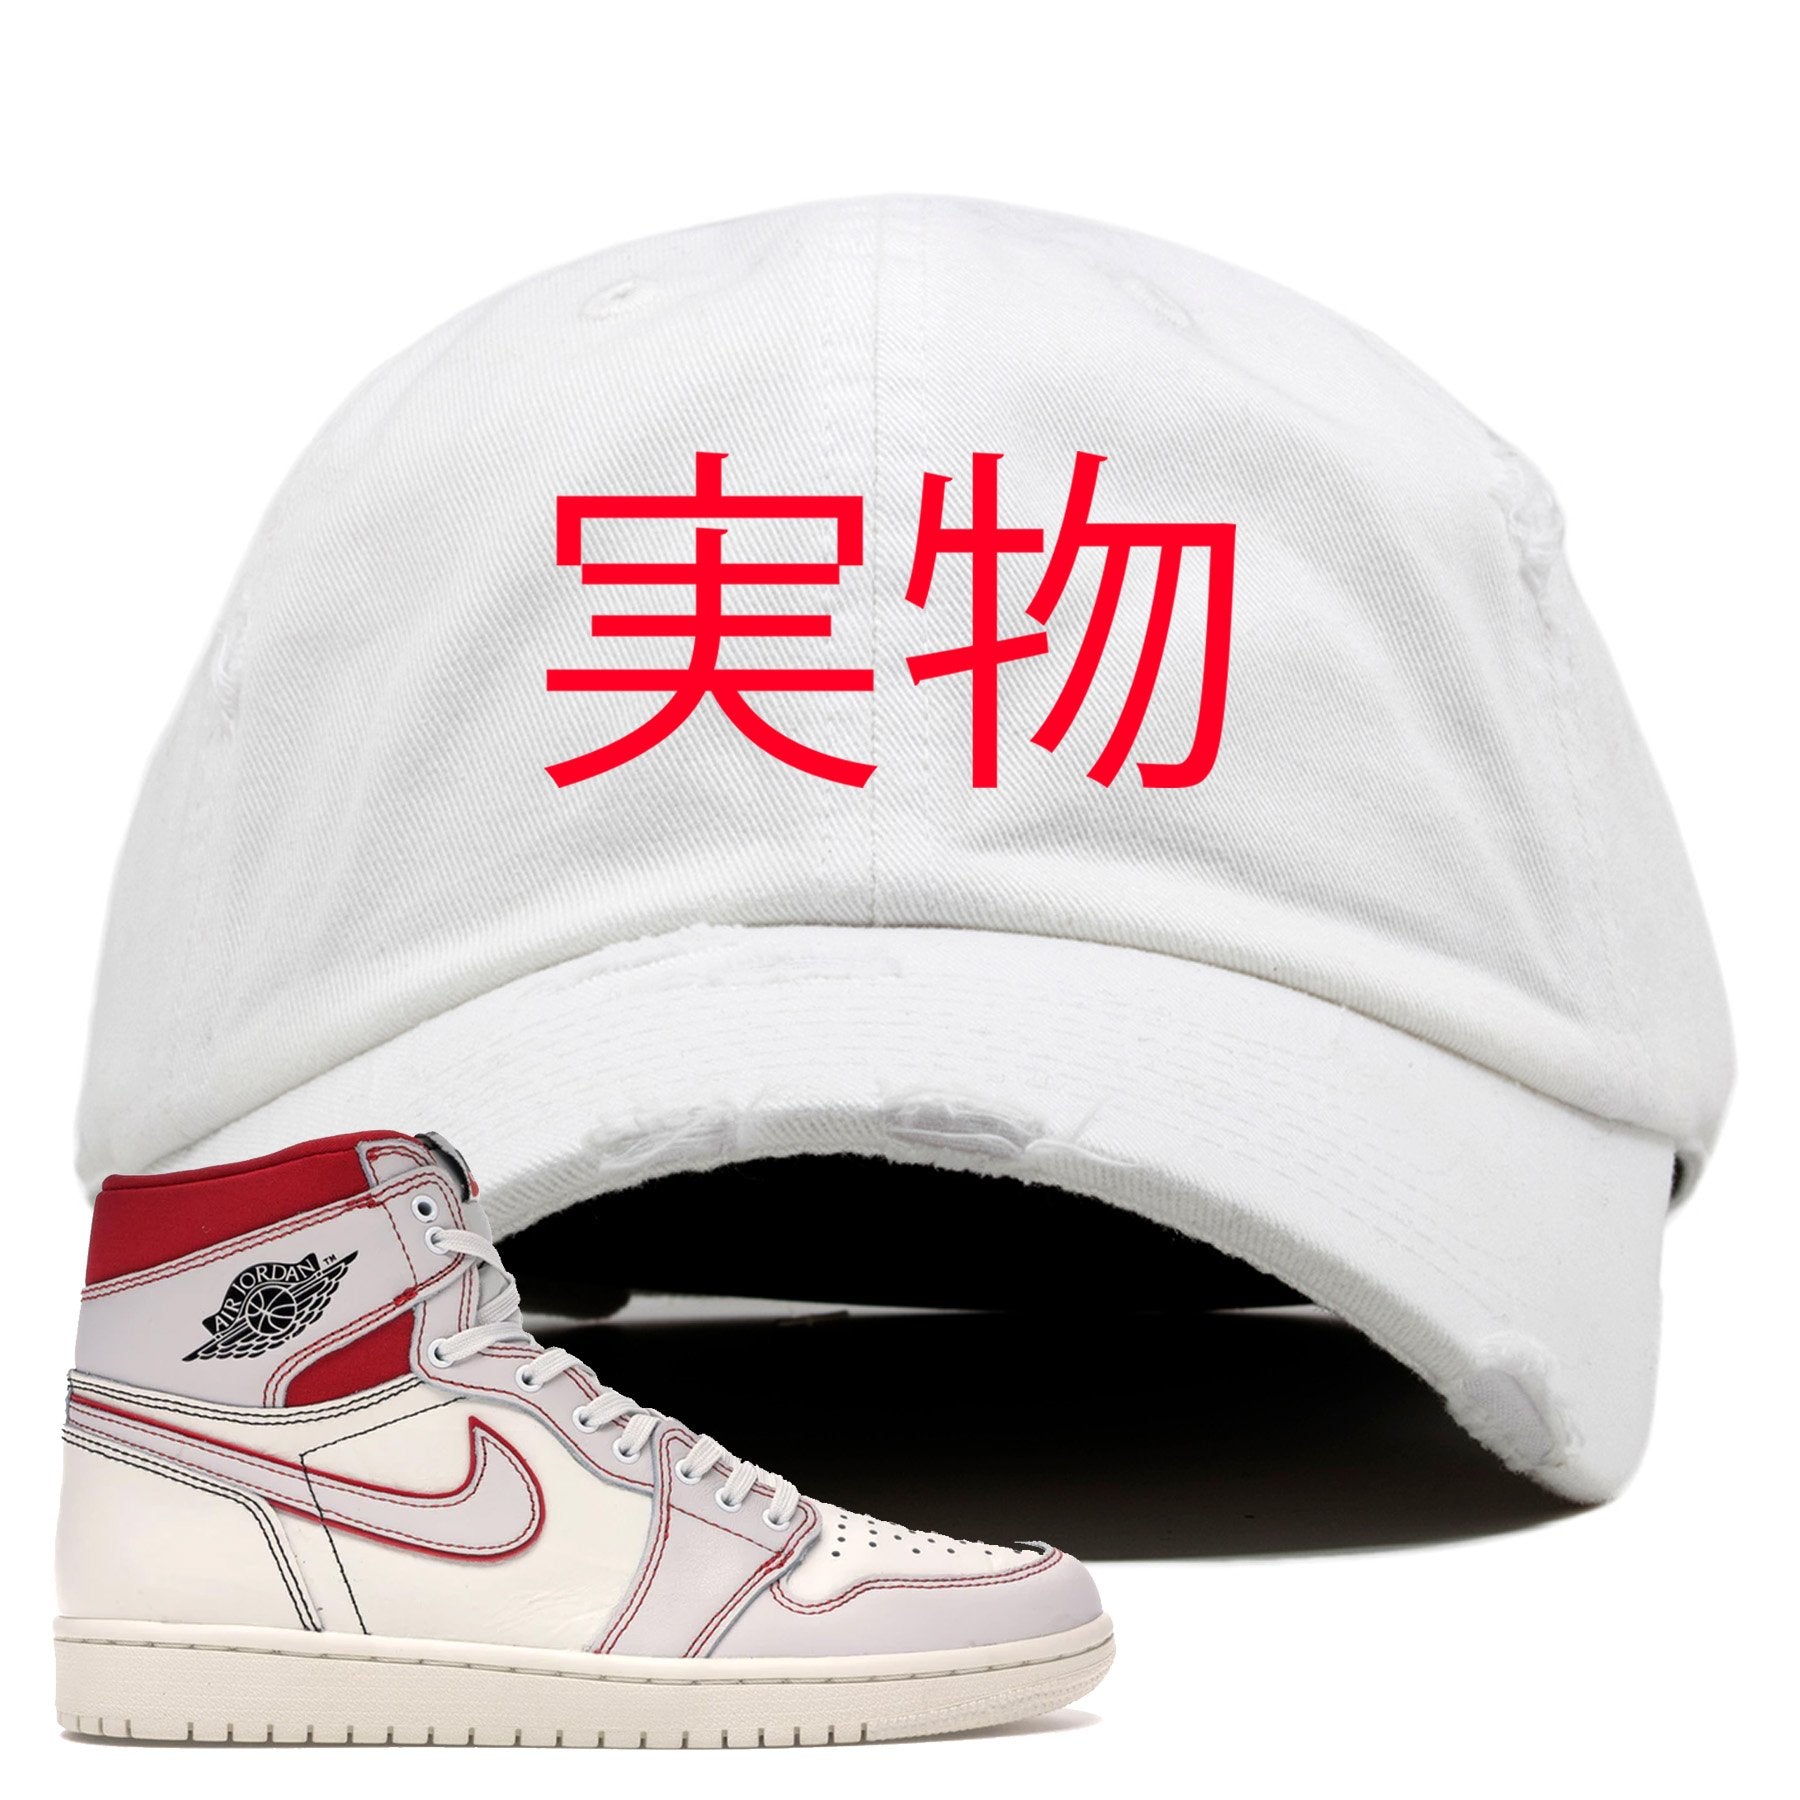 White and red hat that matches the High Retro Jordan 1 shoe